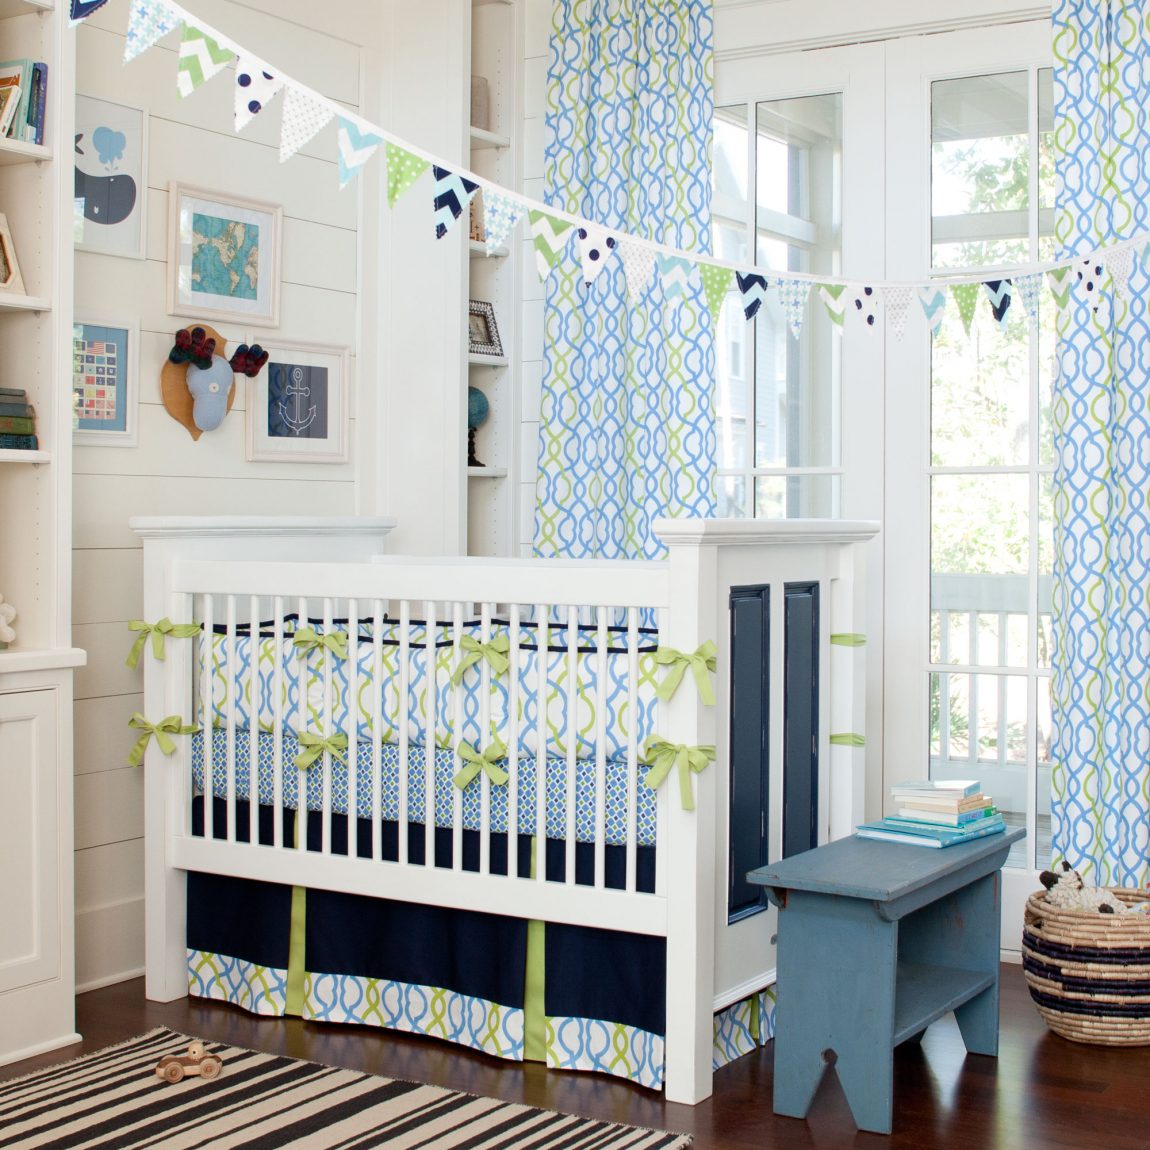 Blue Themed With Trendy Blue Themed Nursery Idea With Baby Boy Crib Bedding Decorated With Patterned Banners And Curtain Furniture Enchanting Baby Boy Crib Bedding Applied In Colorful Baby Room